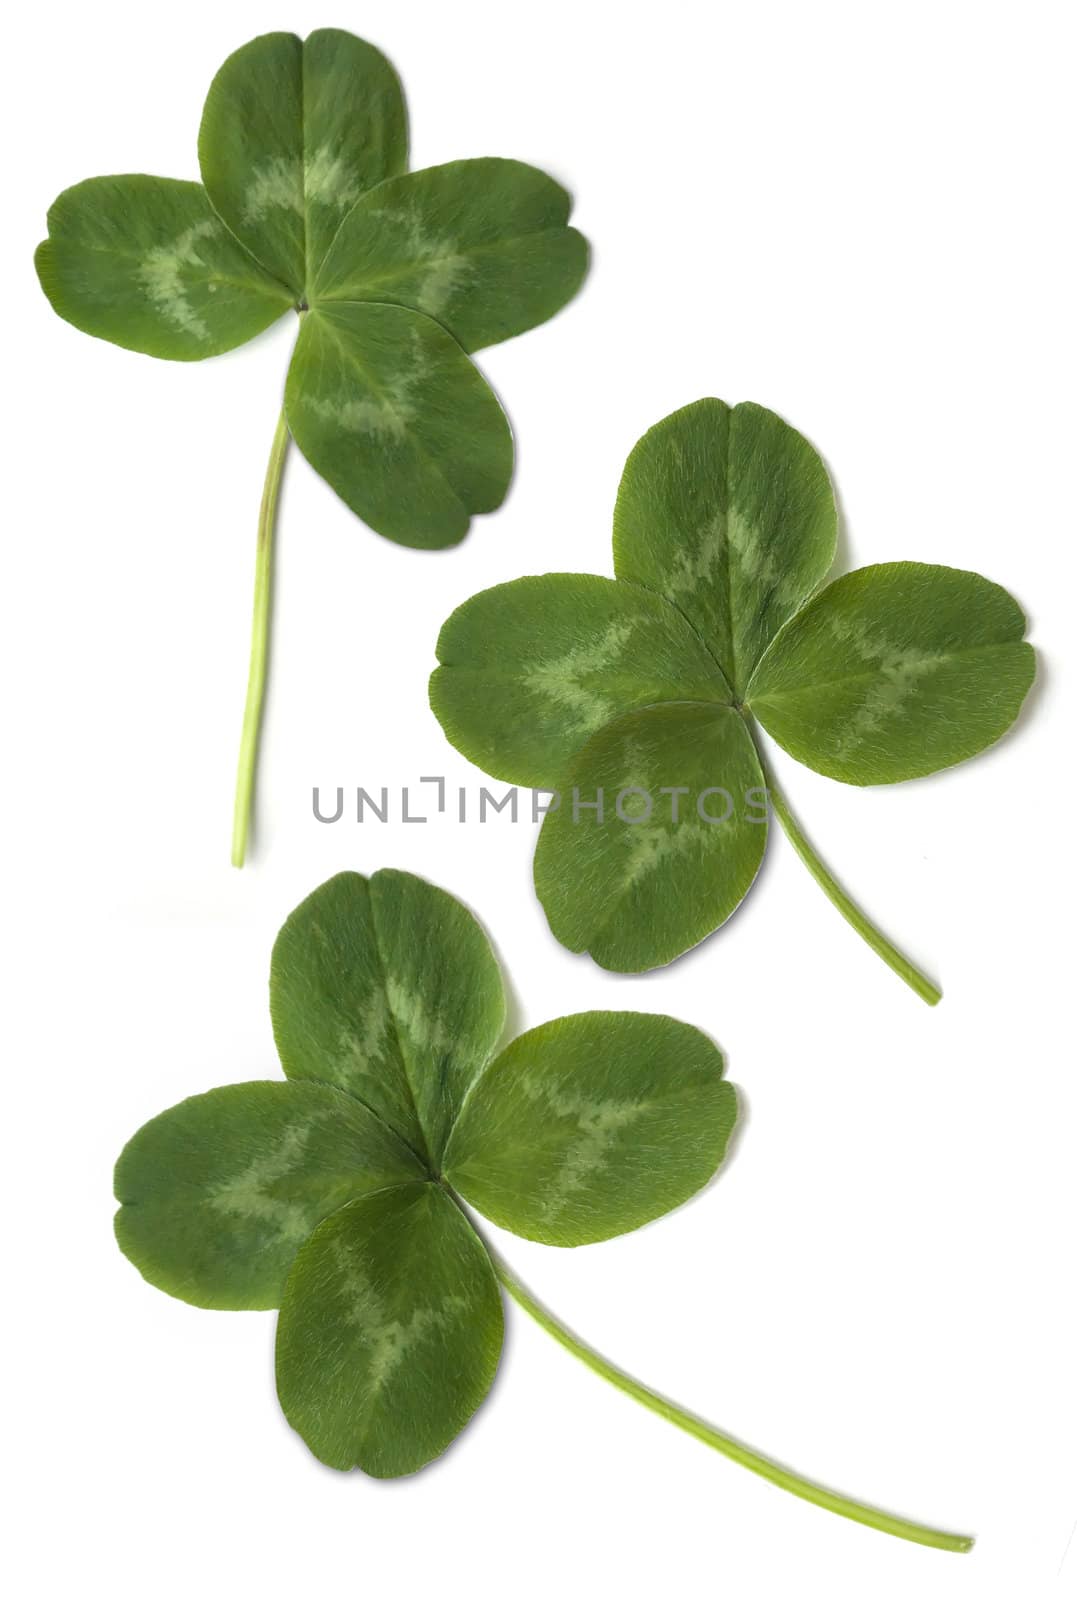 four leaved clover isolated on white background